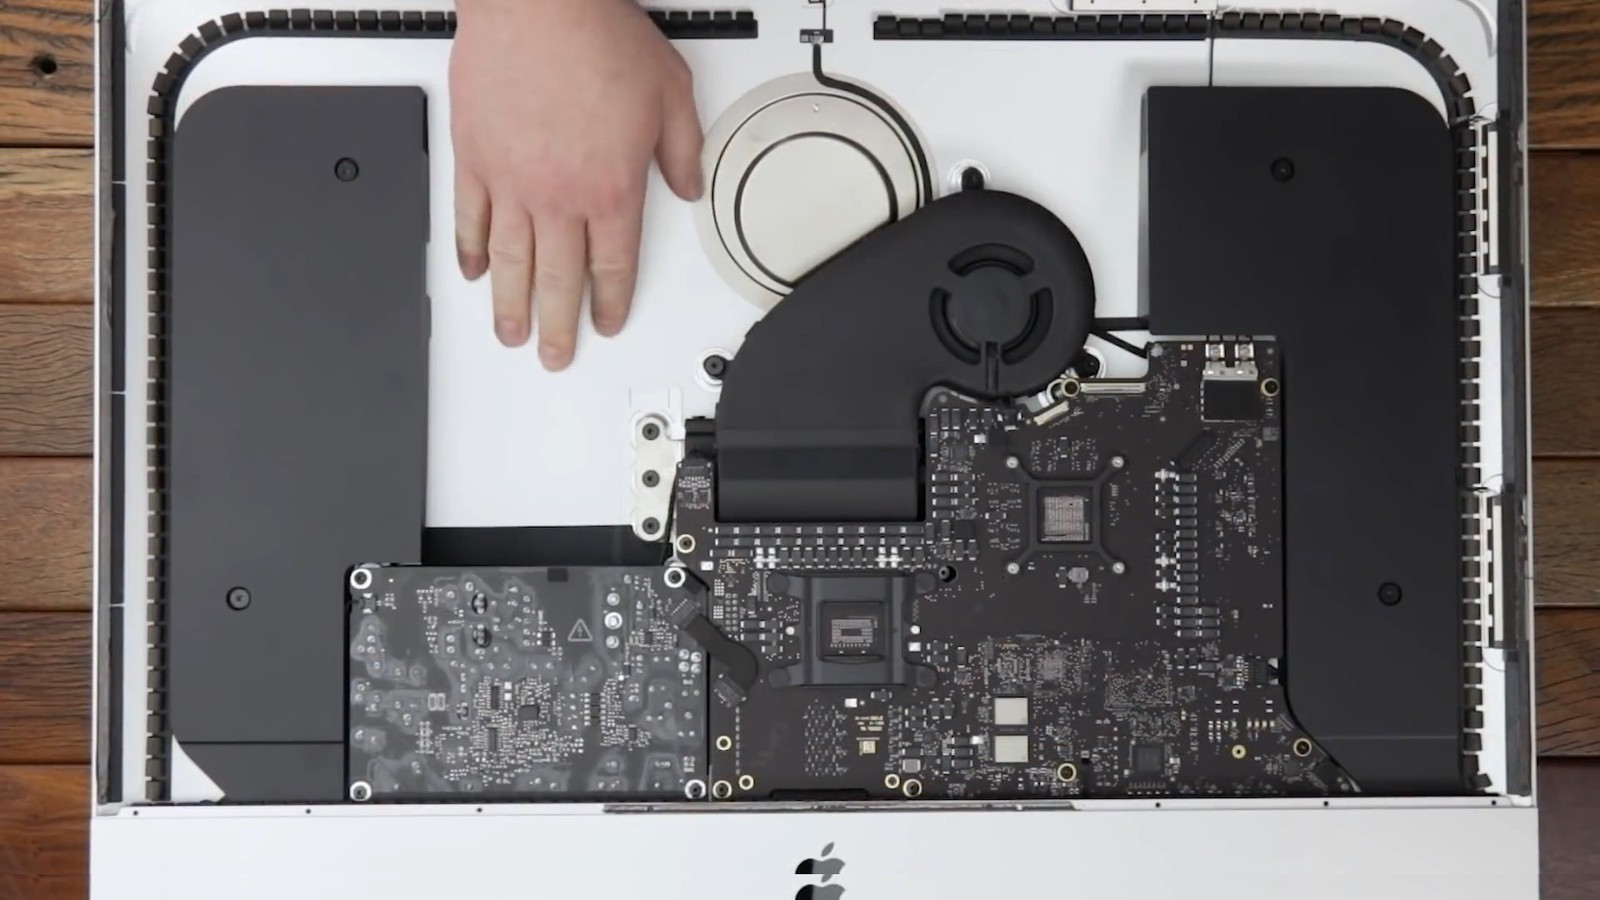 Teardown Of Imac Shows Extra Camera Cable Empty Space Inside